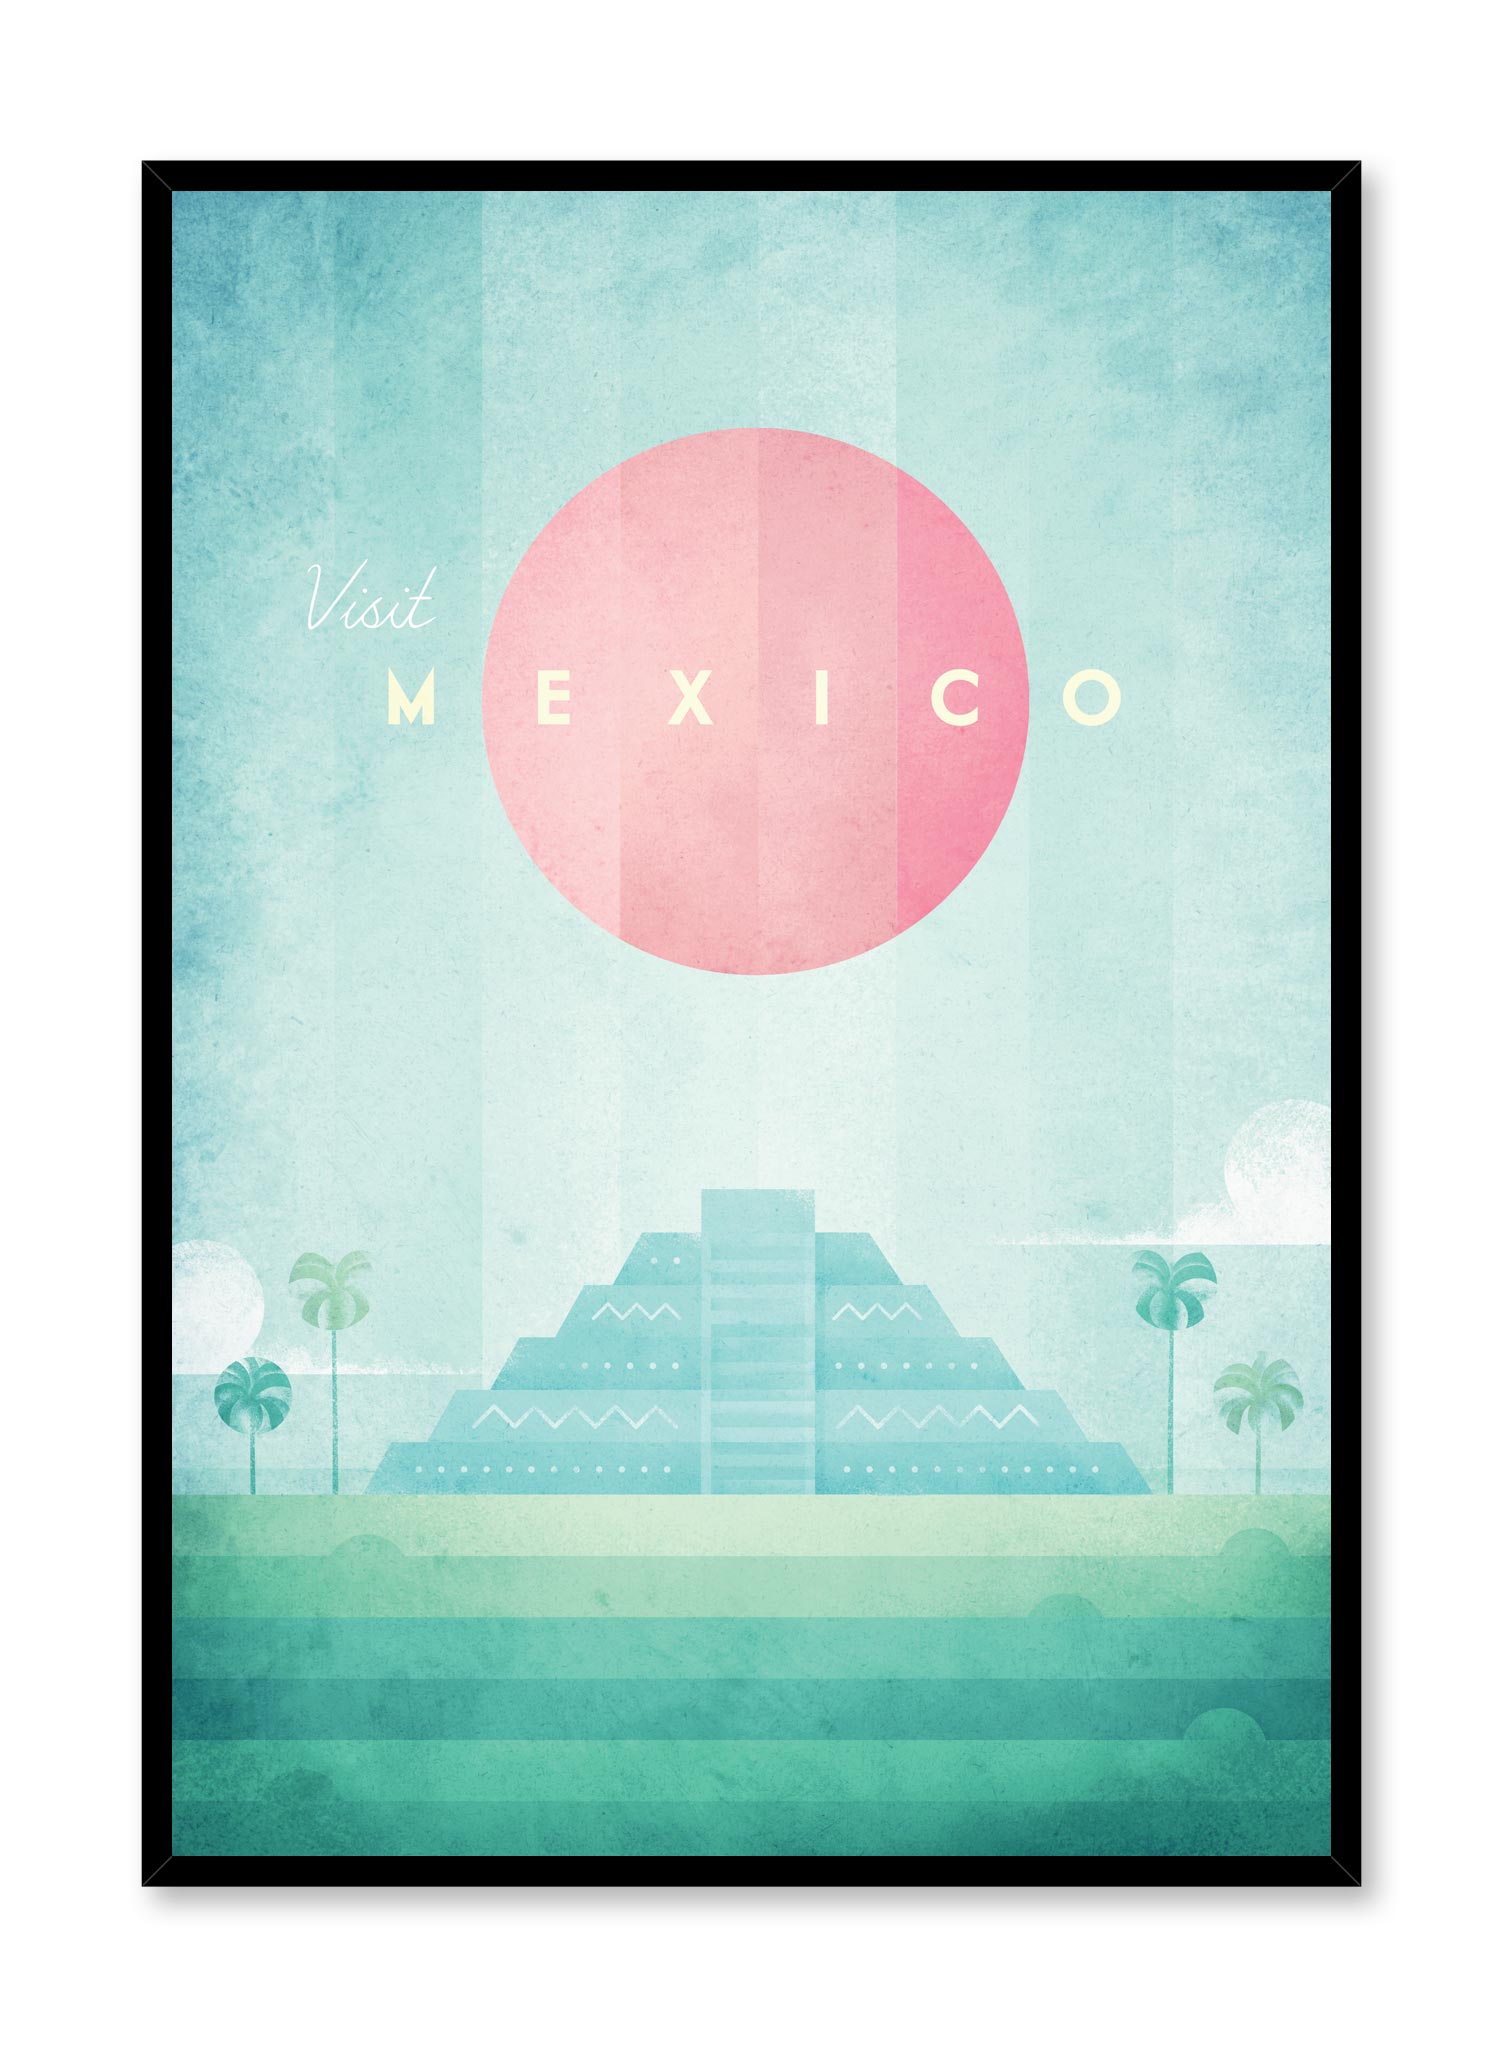 Modern minimalist travel poster by Opposite Wall with illustration of Mexico